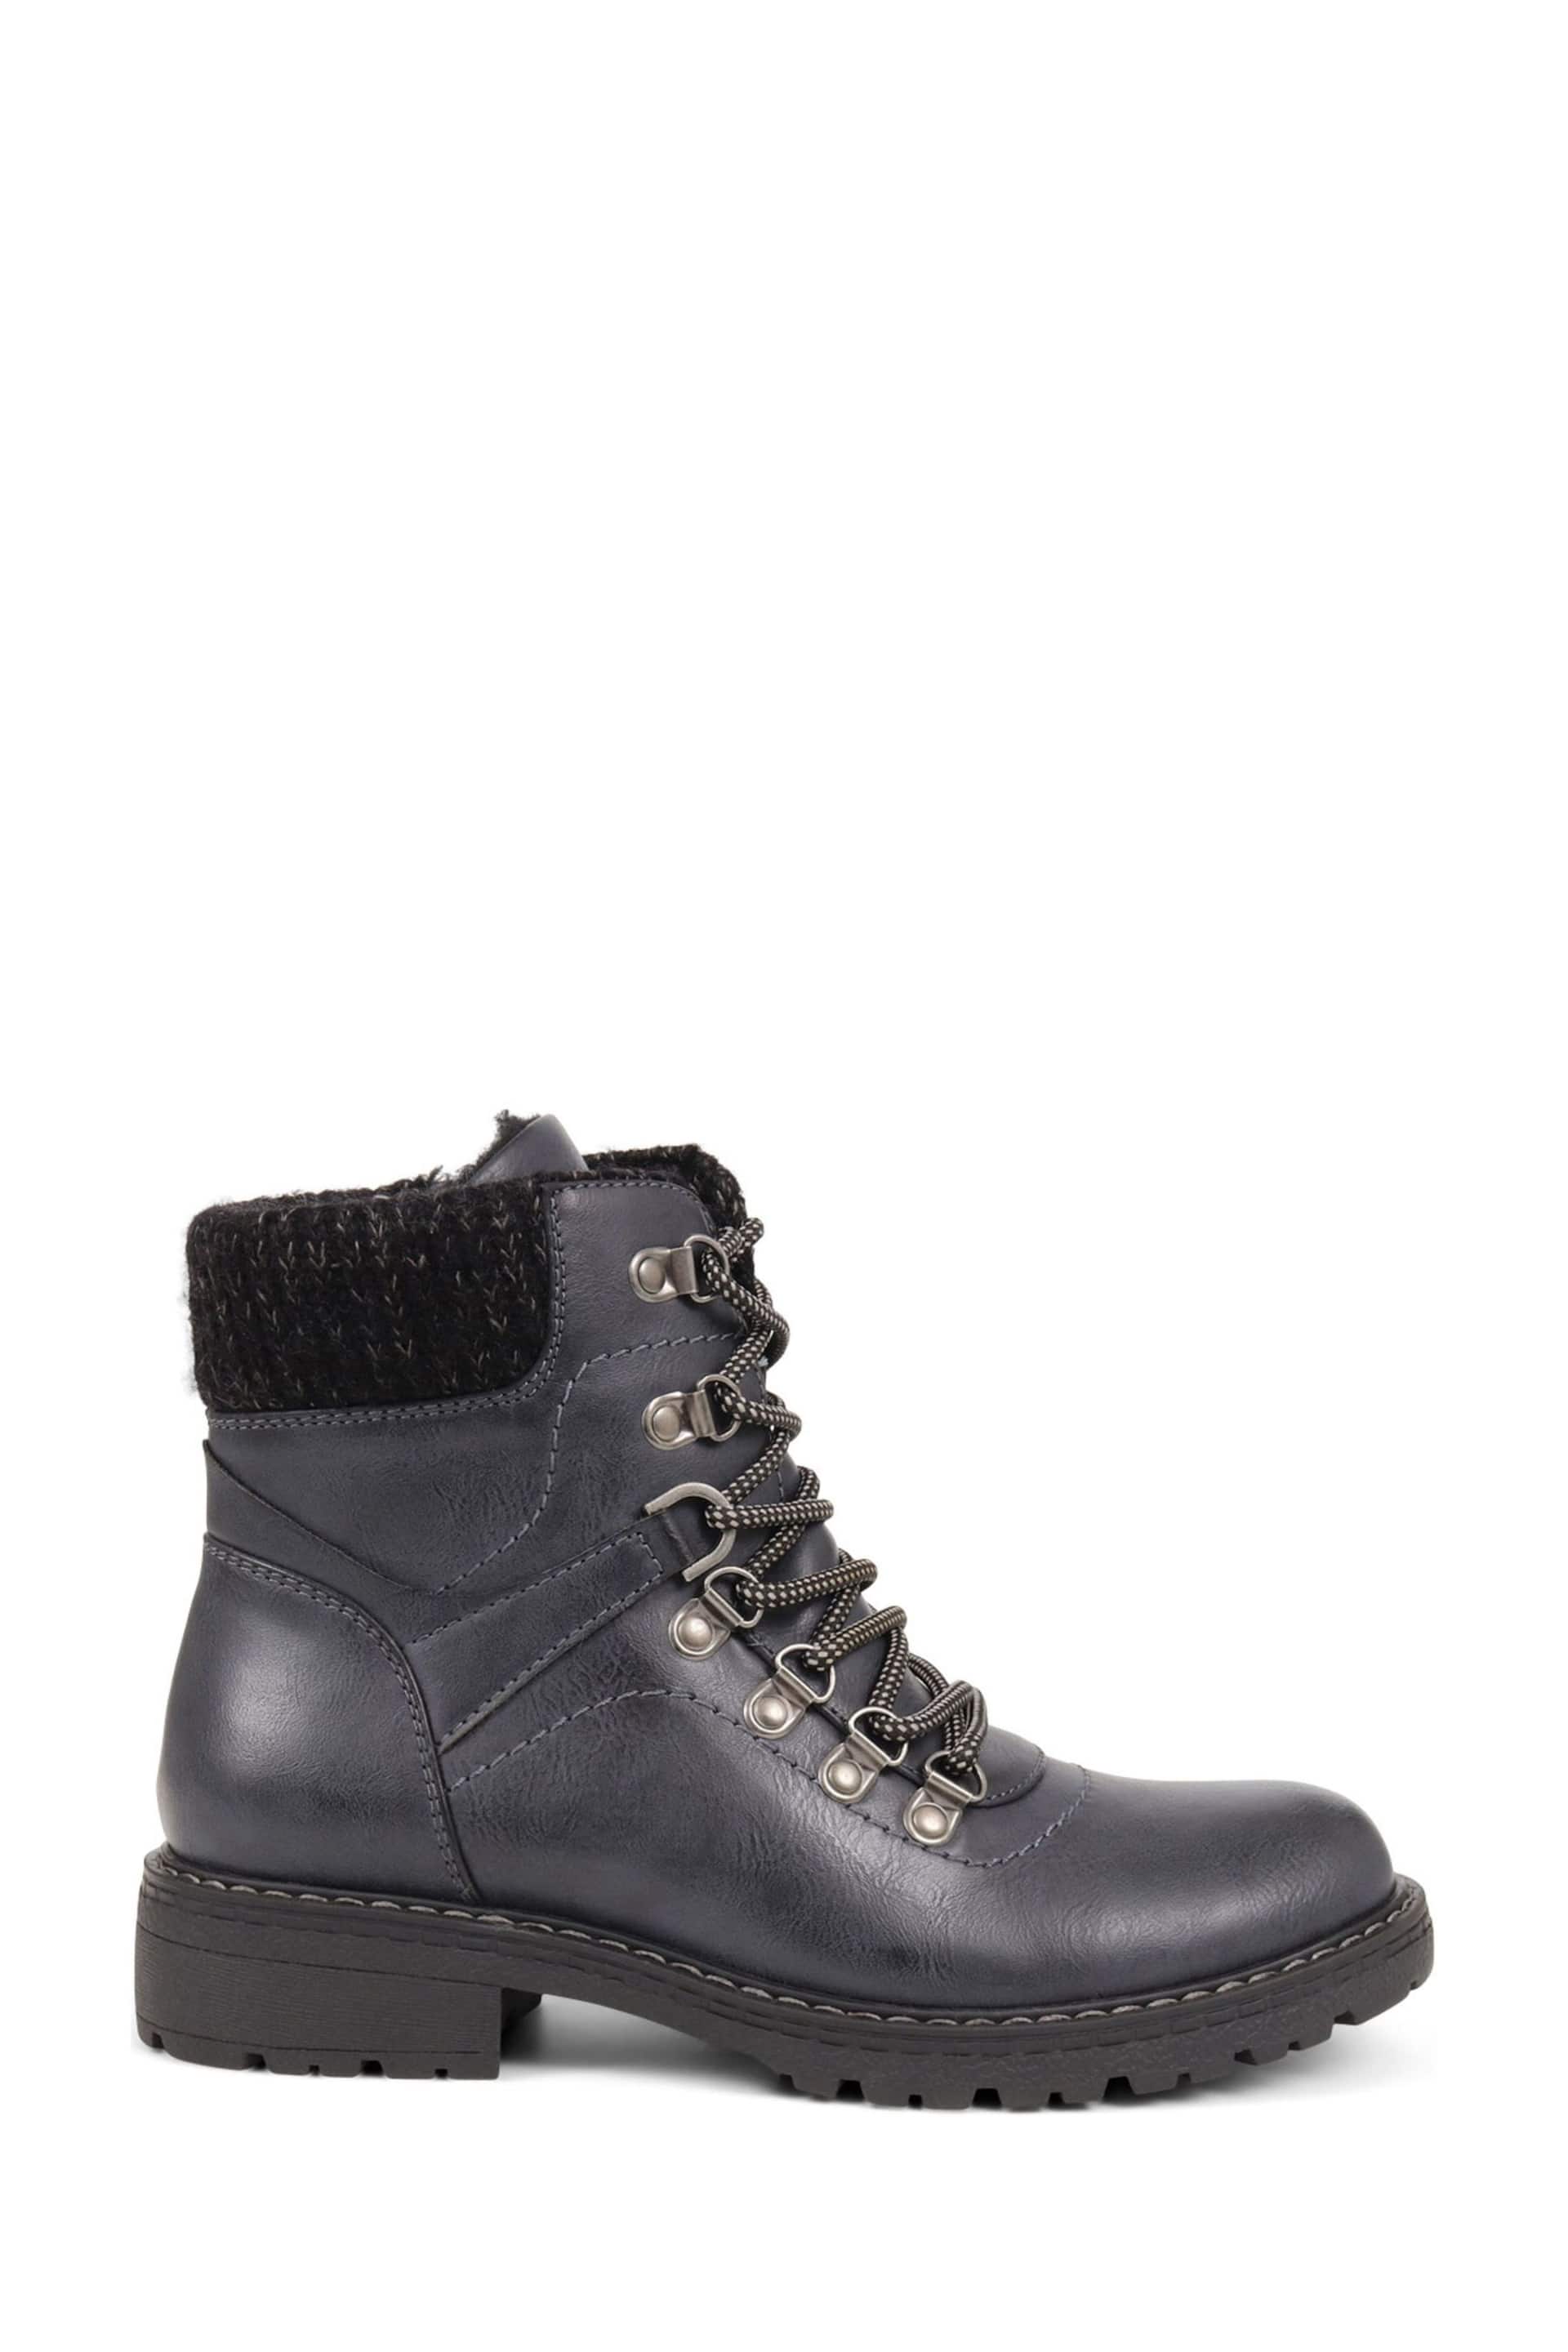 Pavers Lace Up Ankle Boots - Image 1 of 5